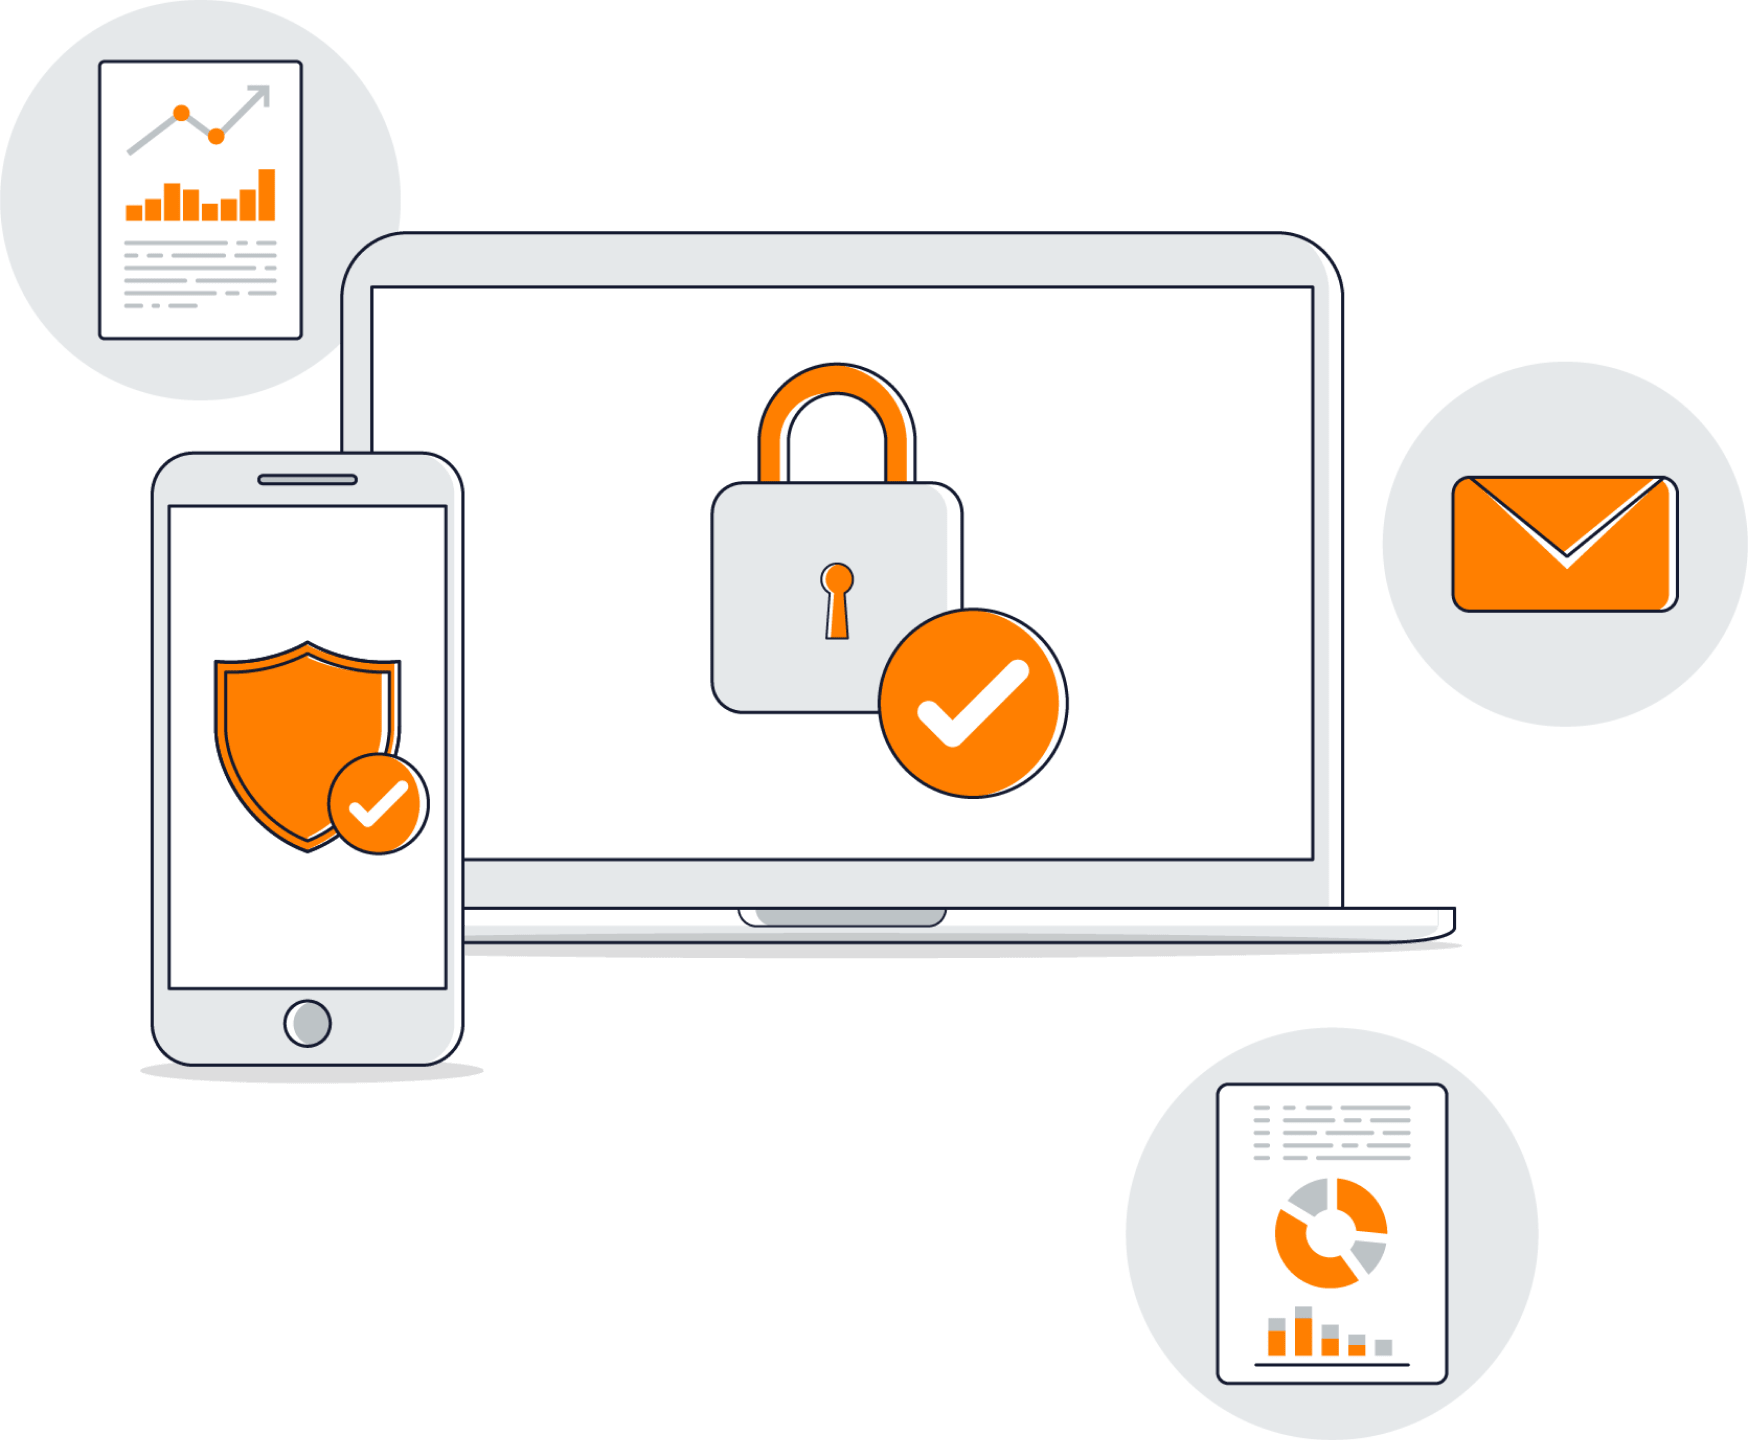 Enthuse takes security and data privacy seriously - data manager approved!